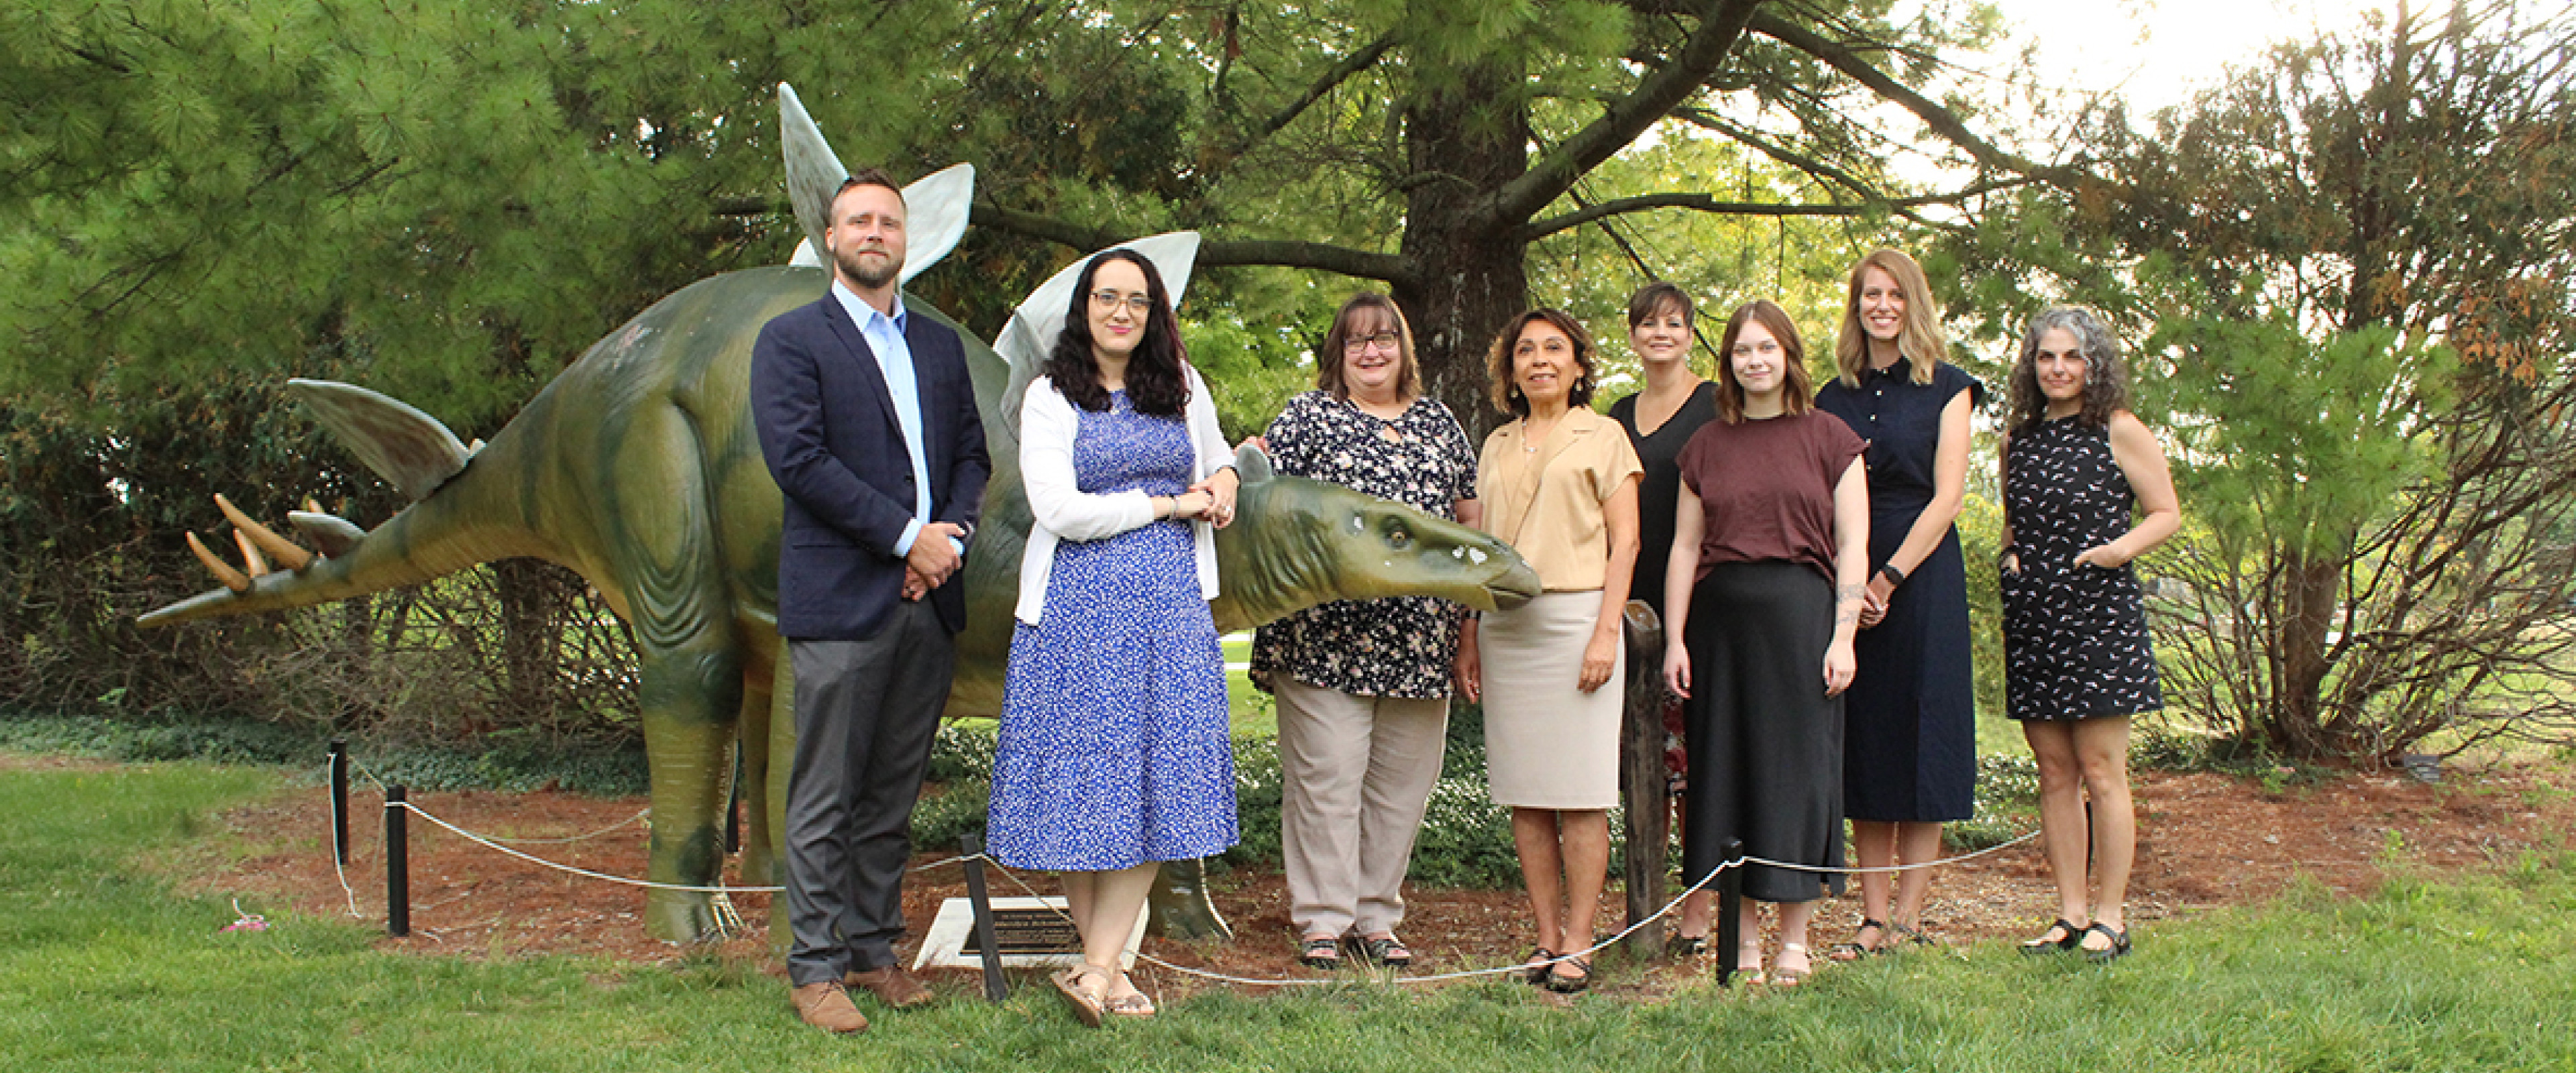 Lee Honors College Staff with Steve the Stegosaurus